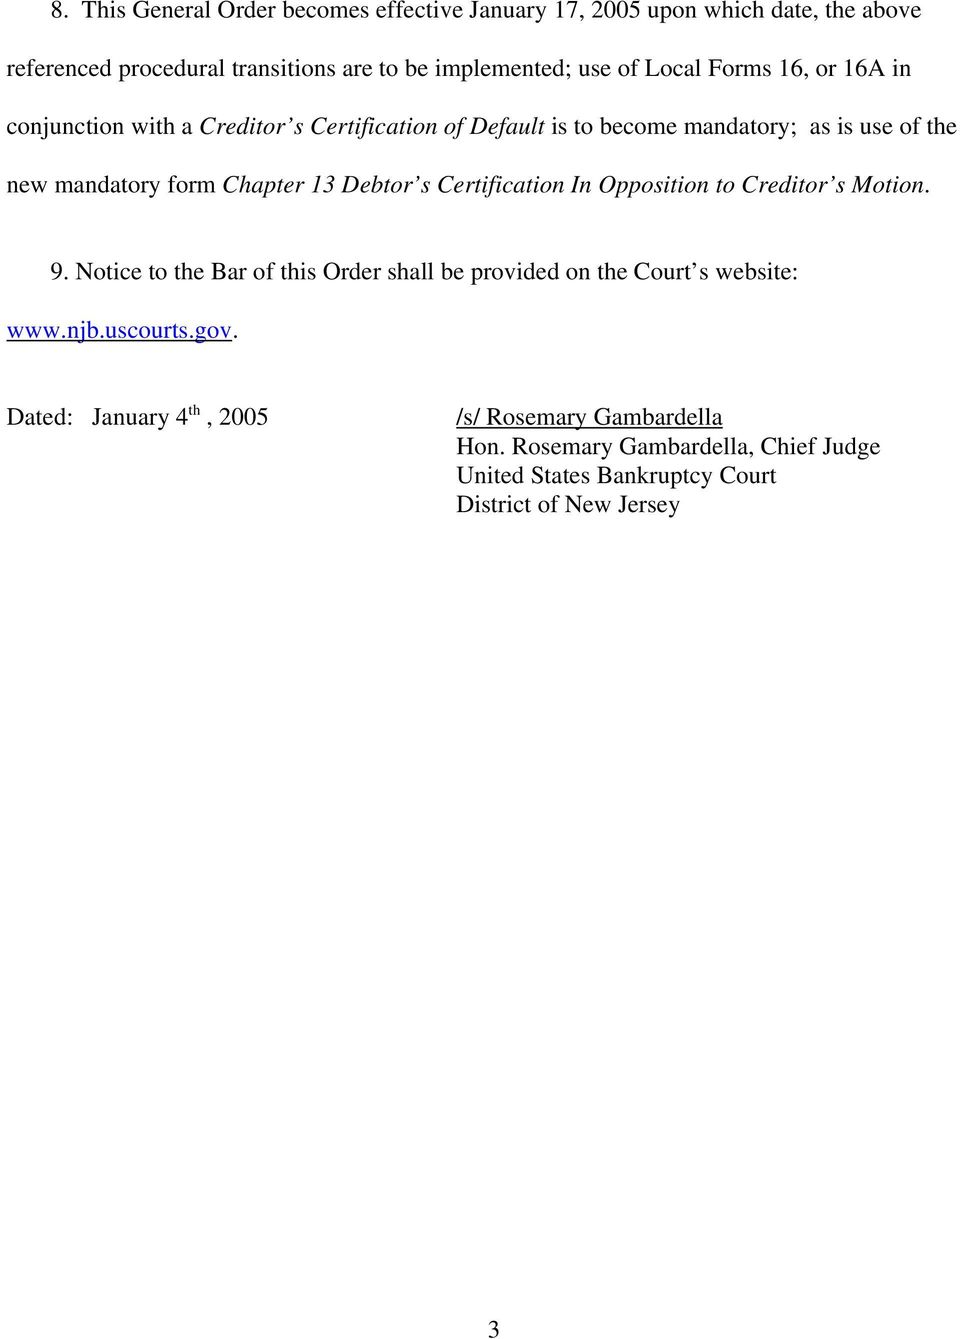 13 Debtor s Certification In Opposition to Creditor s Motion. 9. Notice to the Bar of this Order shall be provided on the Court s website: www.njb.